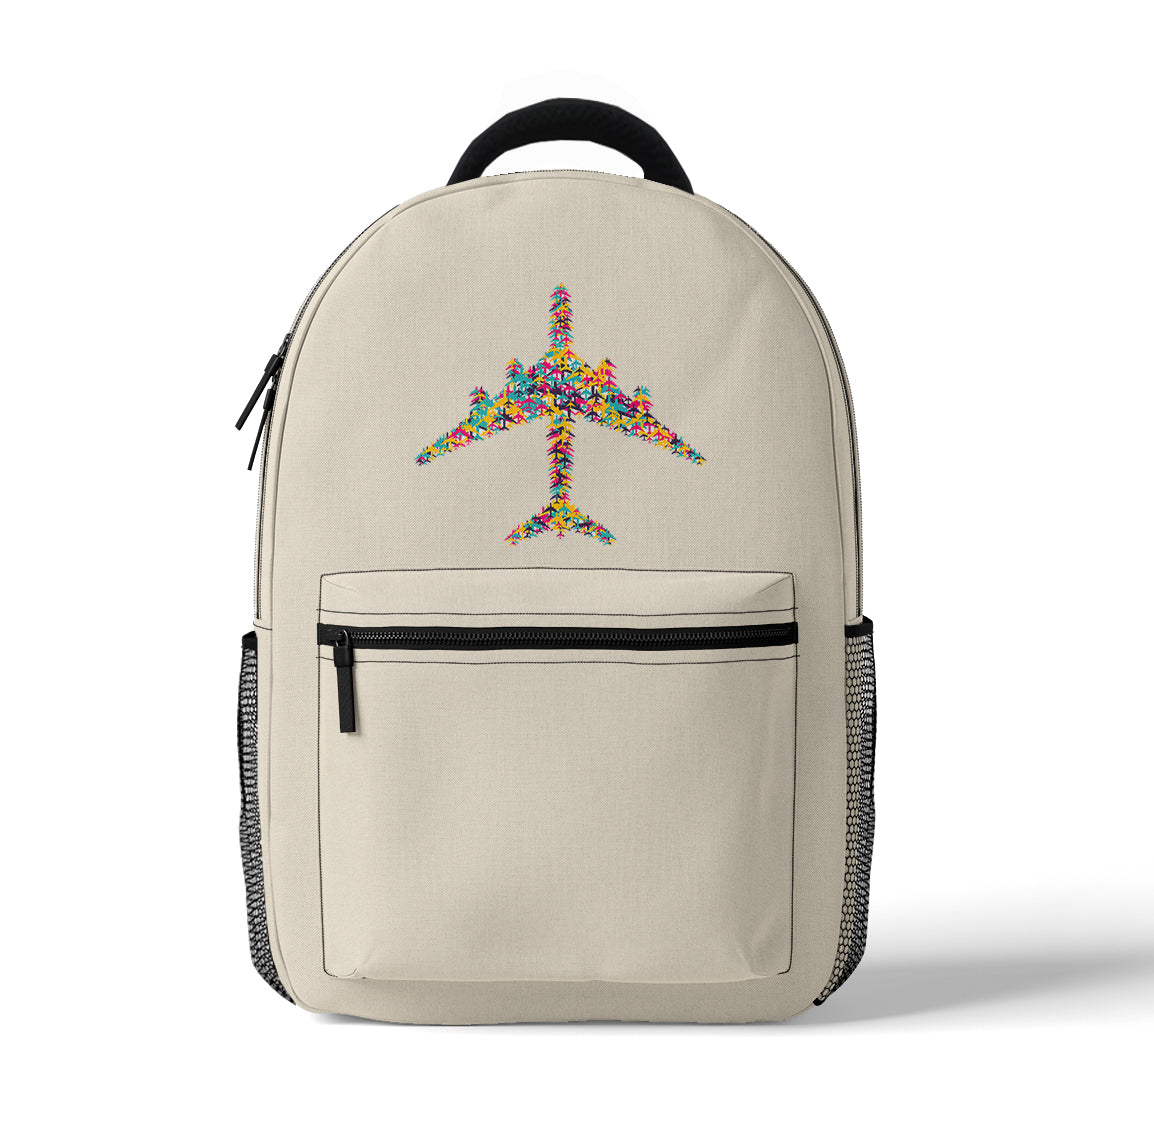 Colourful Airplane Designed 3D Backpacks